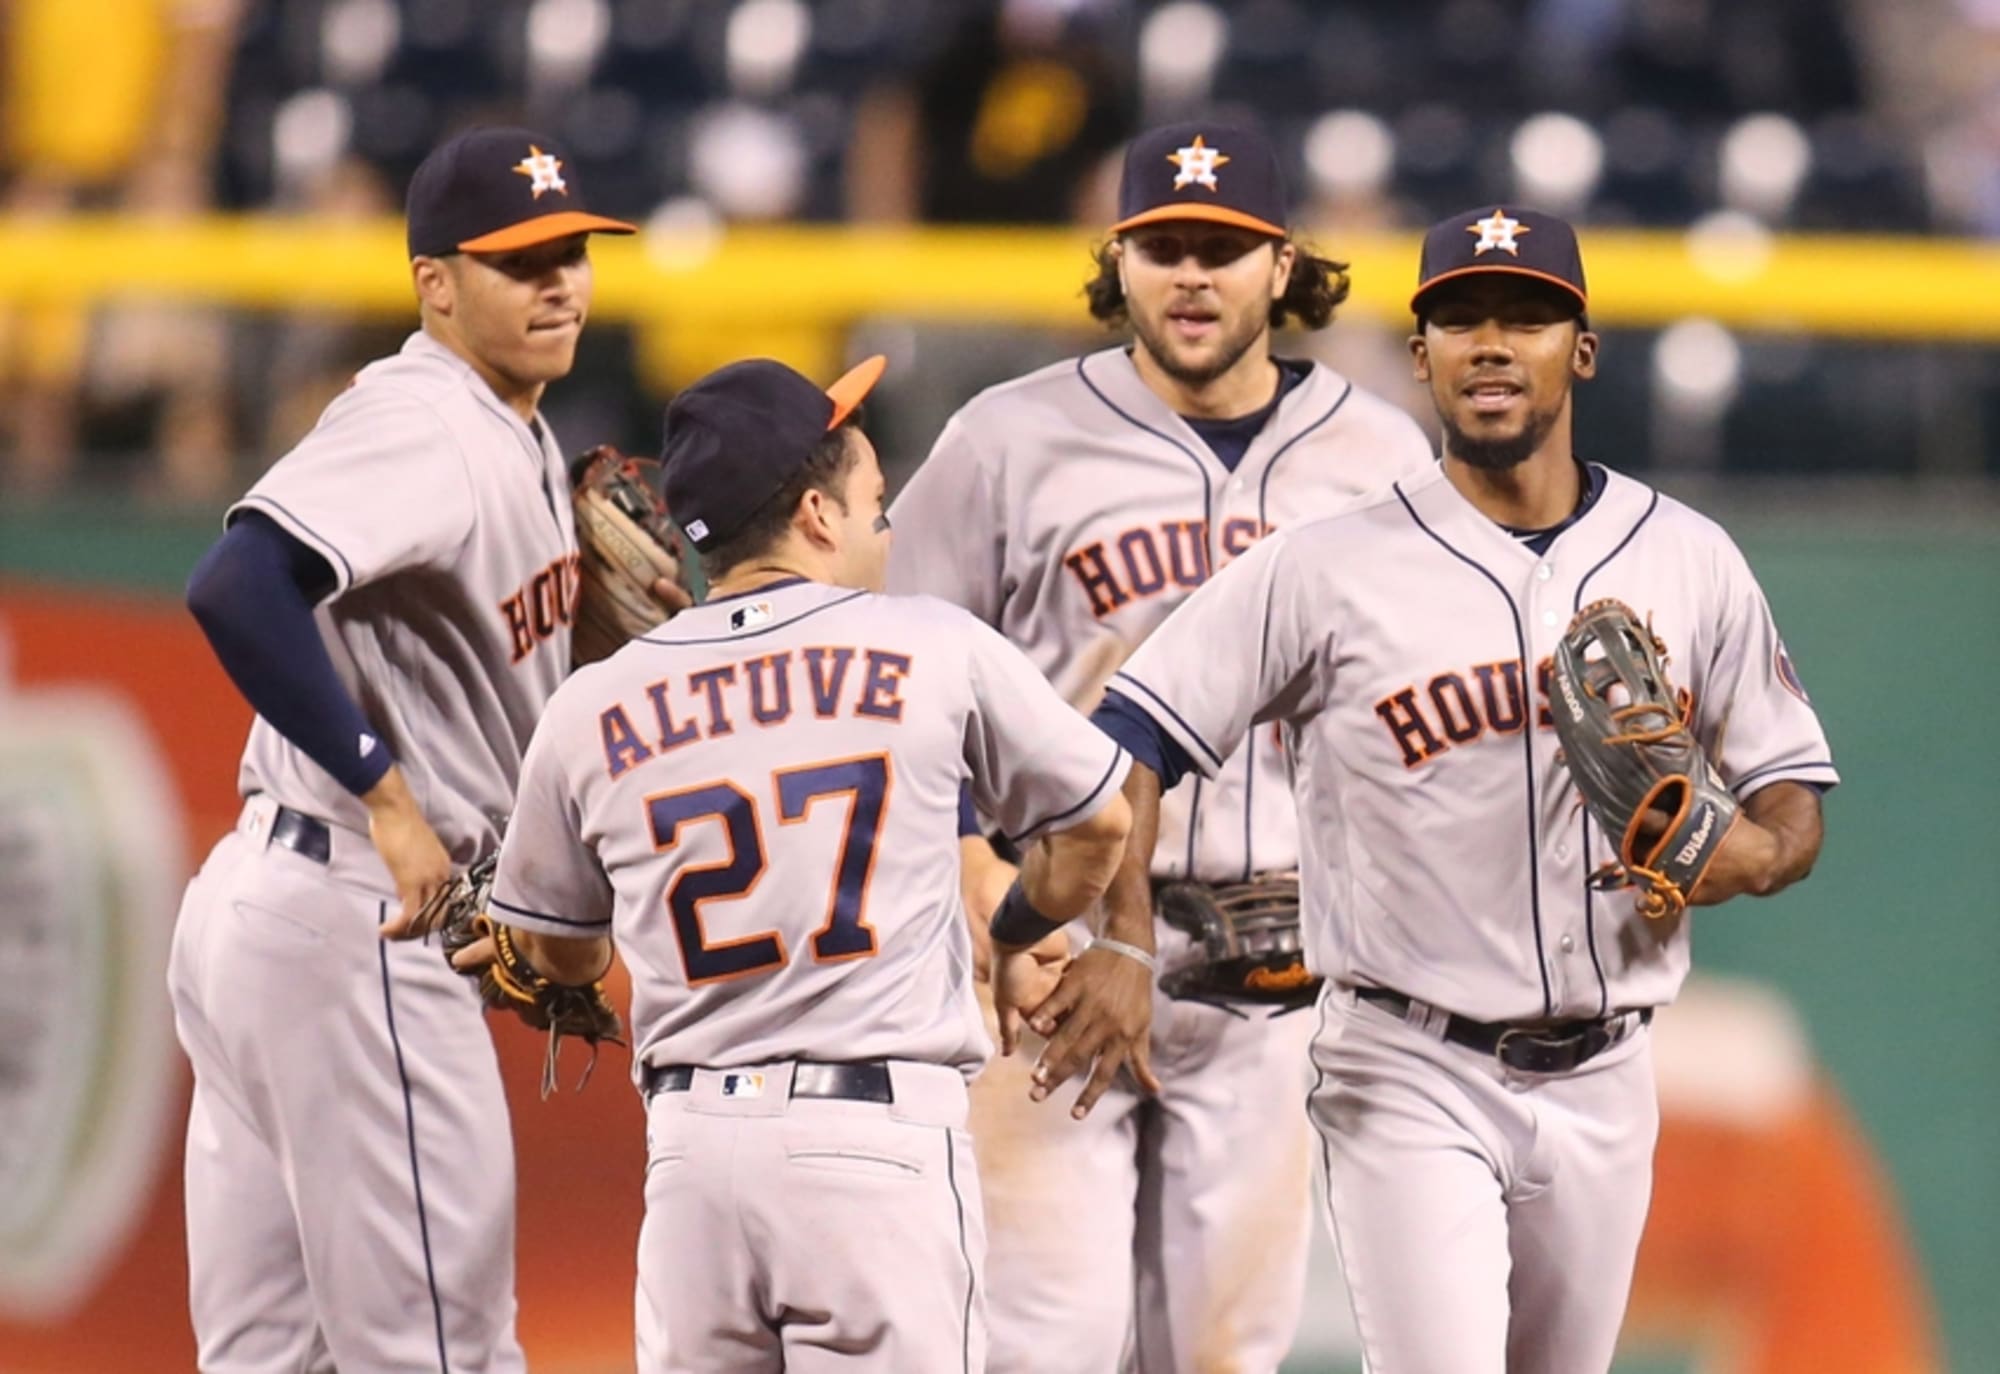 Houston Astros AllTime Great Top 25 Roster